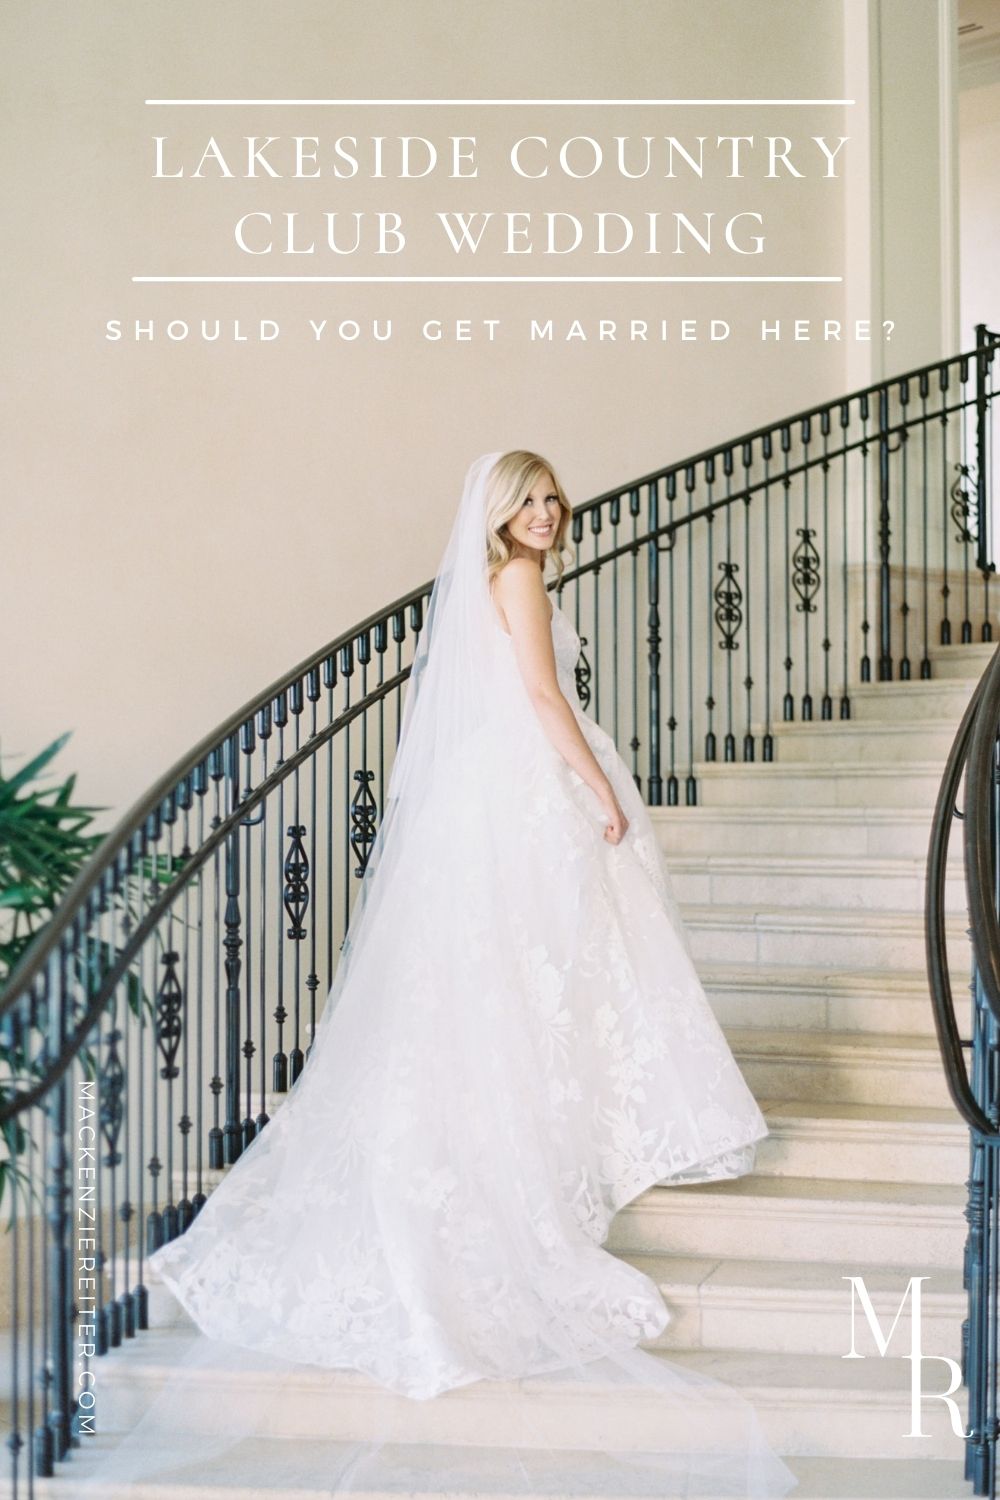 Stunning bride smiling as she ascends up the stairs in her bridal attire; image overlaid with text that reads Lakeside Country Club Wedding: Should You Get Married Here?